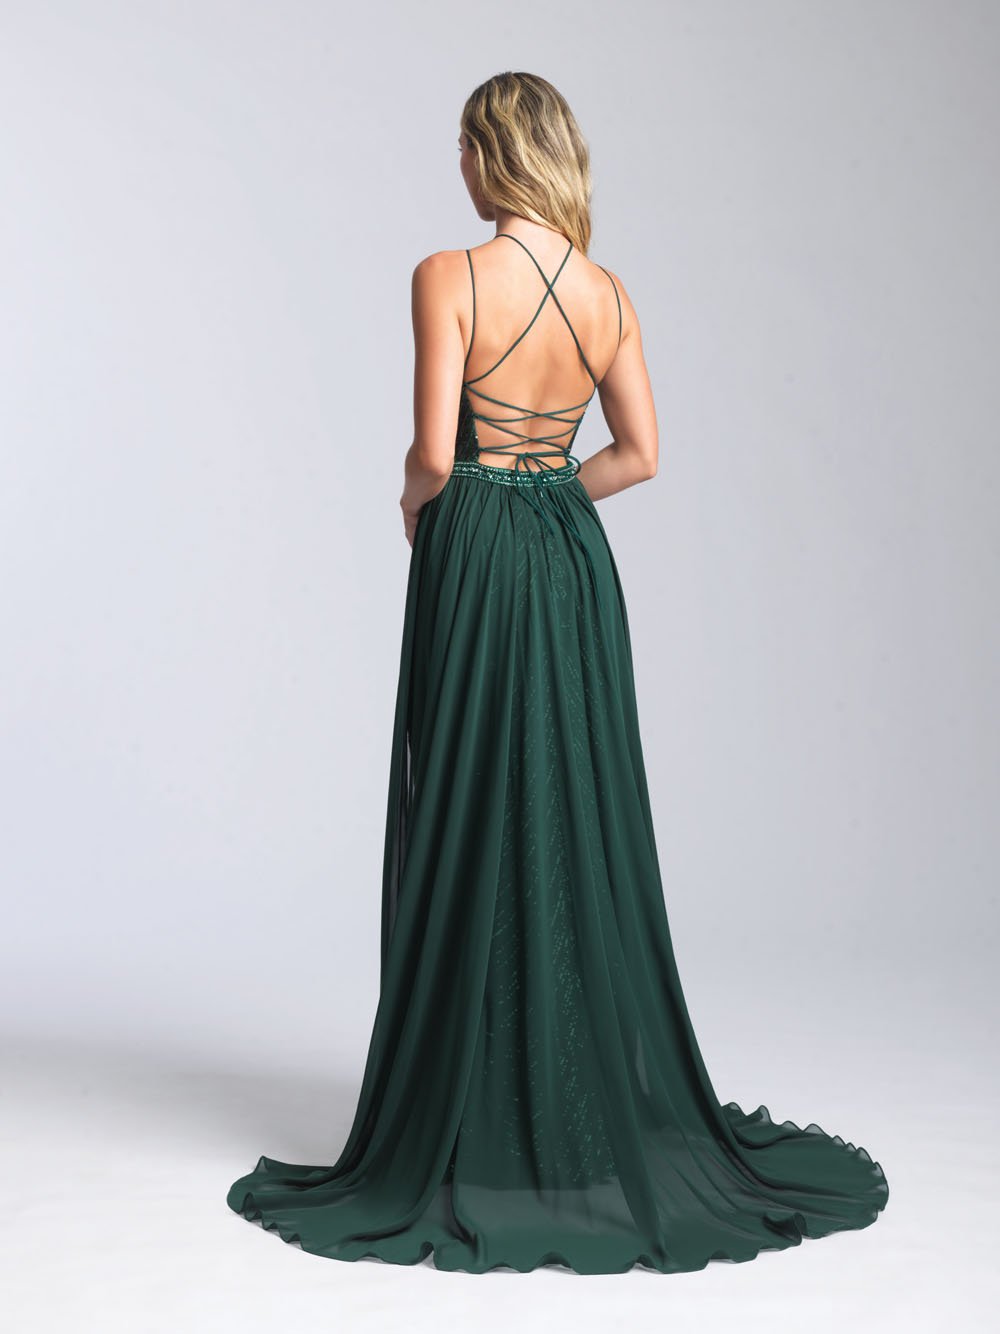 Madison James 20-364 dress images in these colors: Black, Green, Red, Royal.